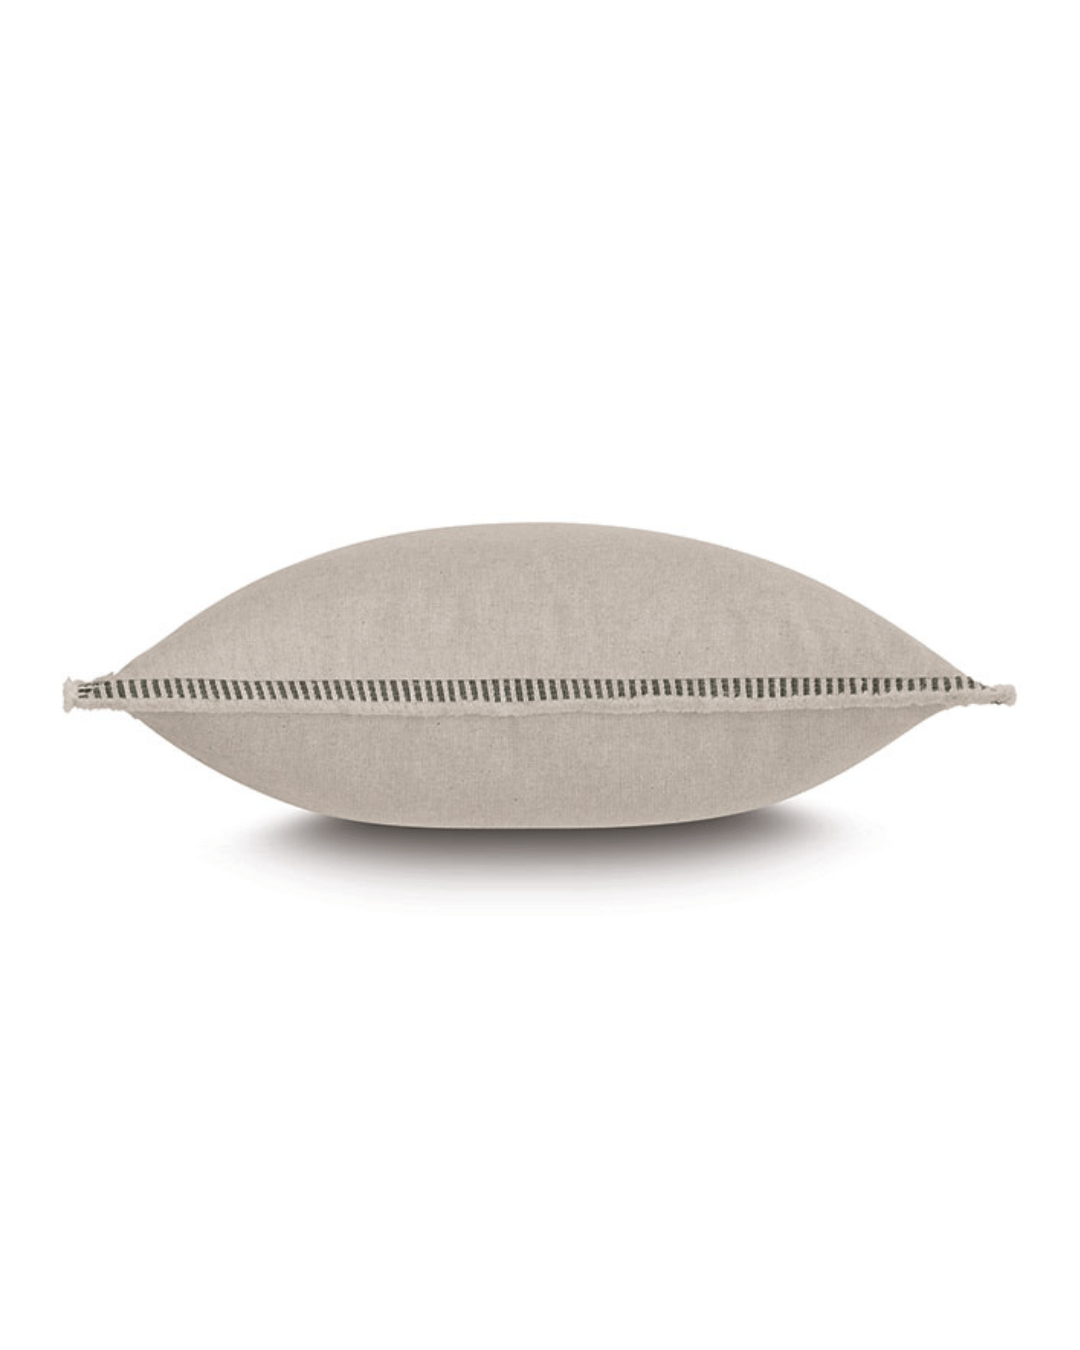 Beige fabric Moa Textured Border Petit pillow with a visible zipper, isolated on a white background, perfect for a Scottsdale Arizona bungalow by Eastern Accents.